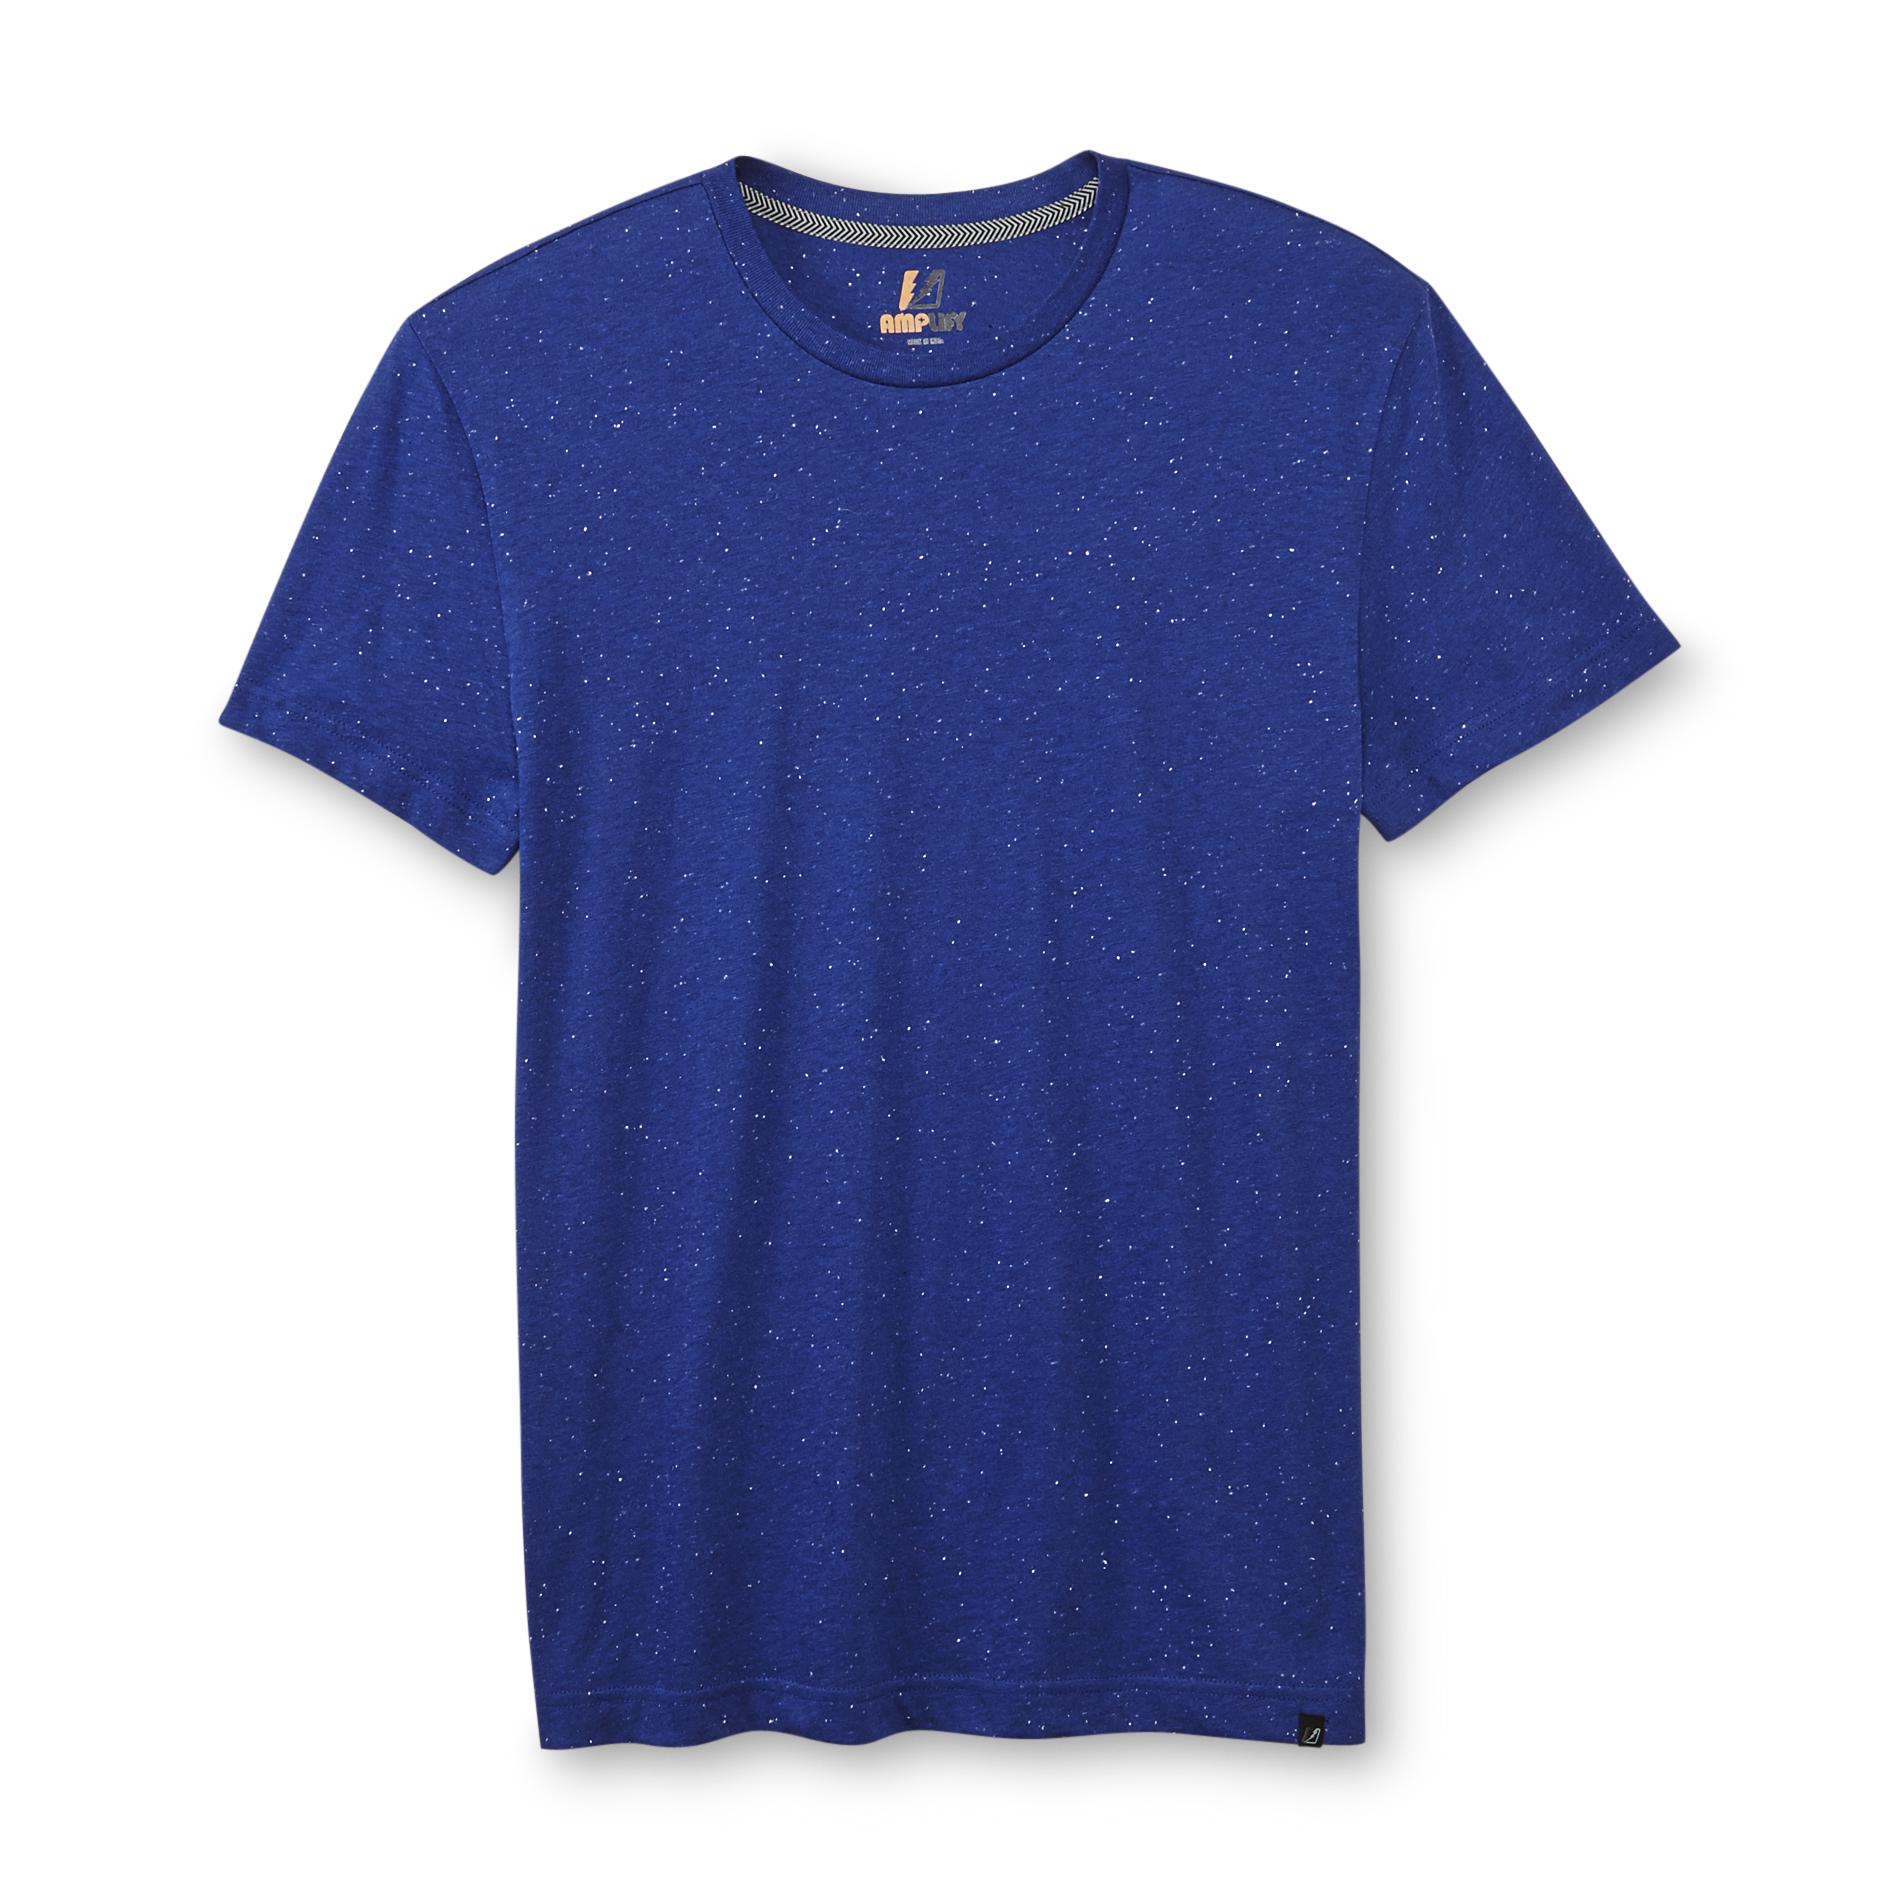 Amplify Young Men's Crew Neck T-Shirt - Speckled